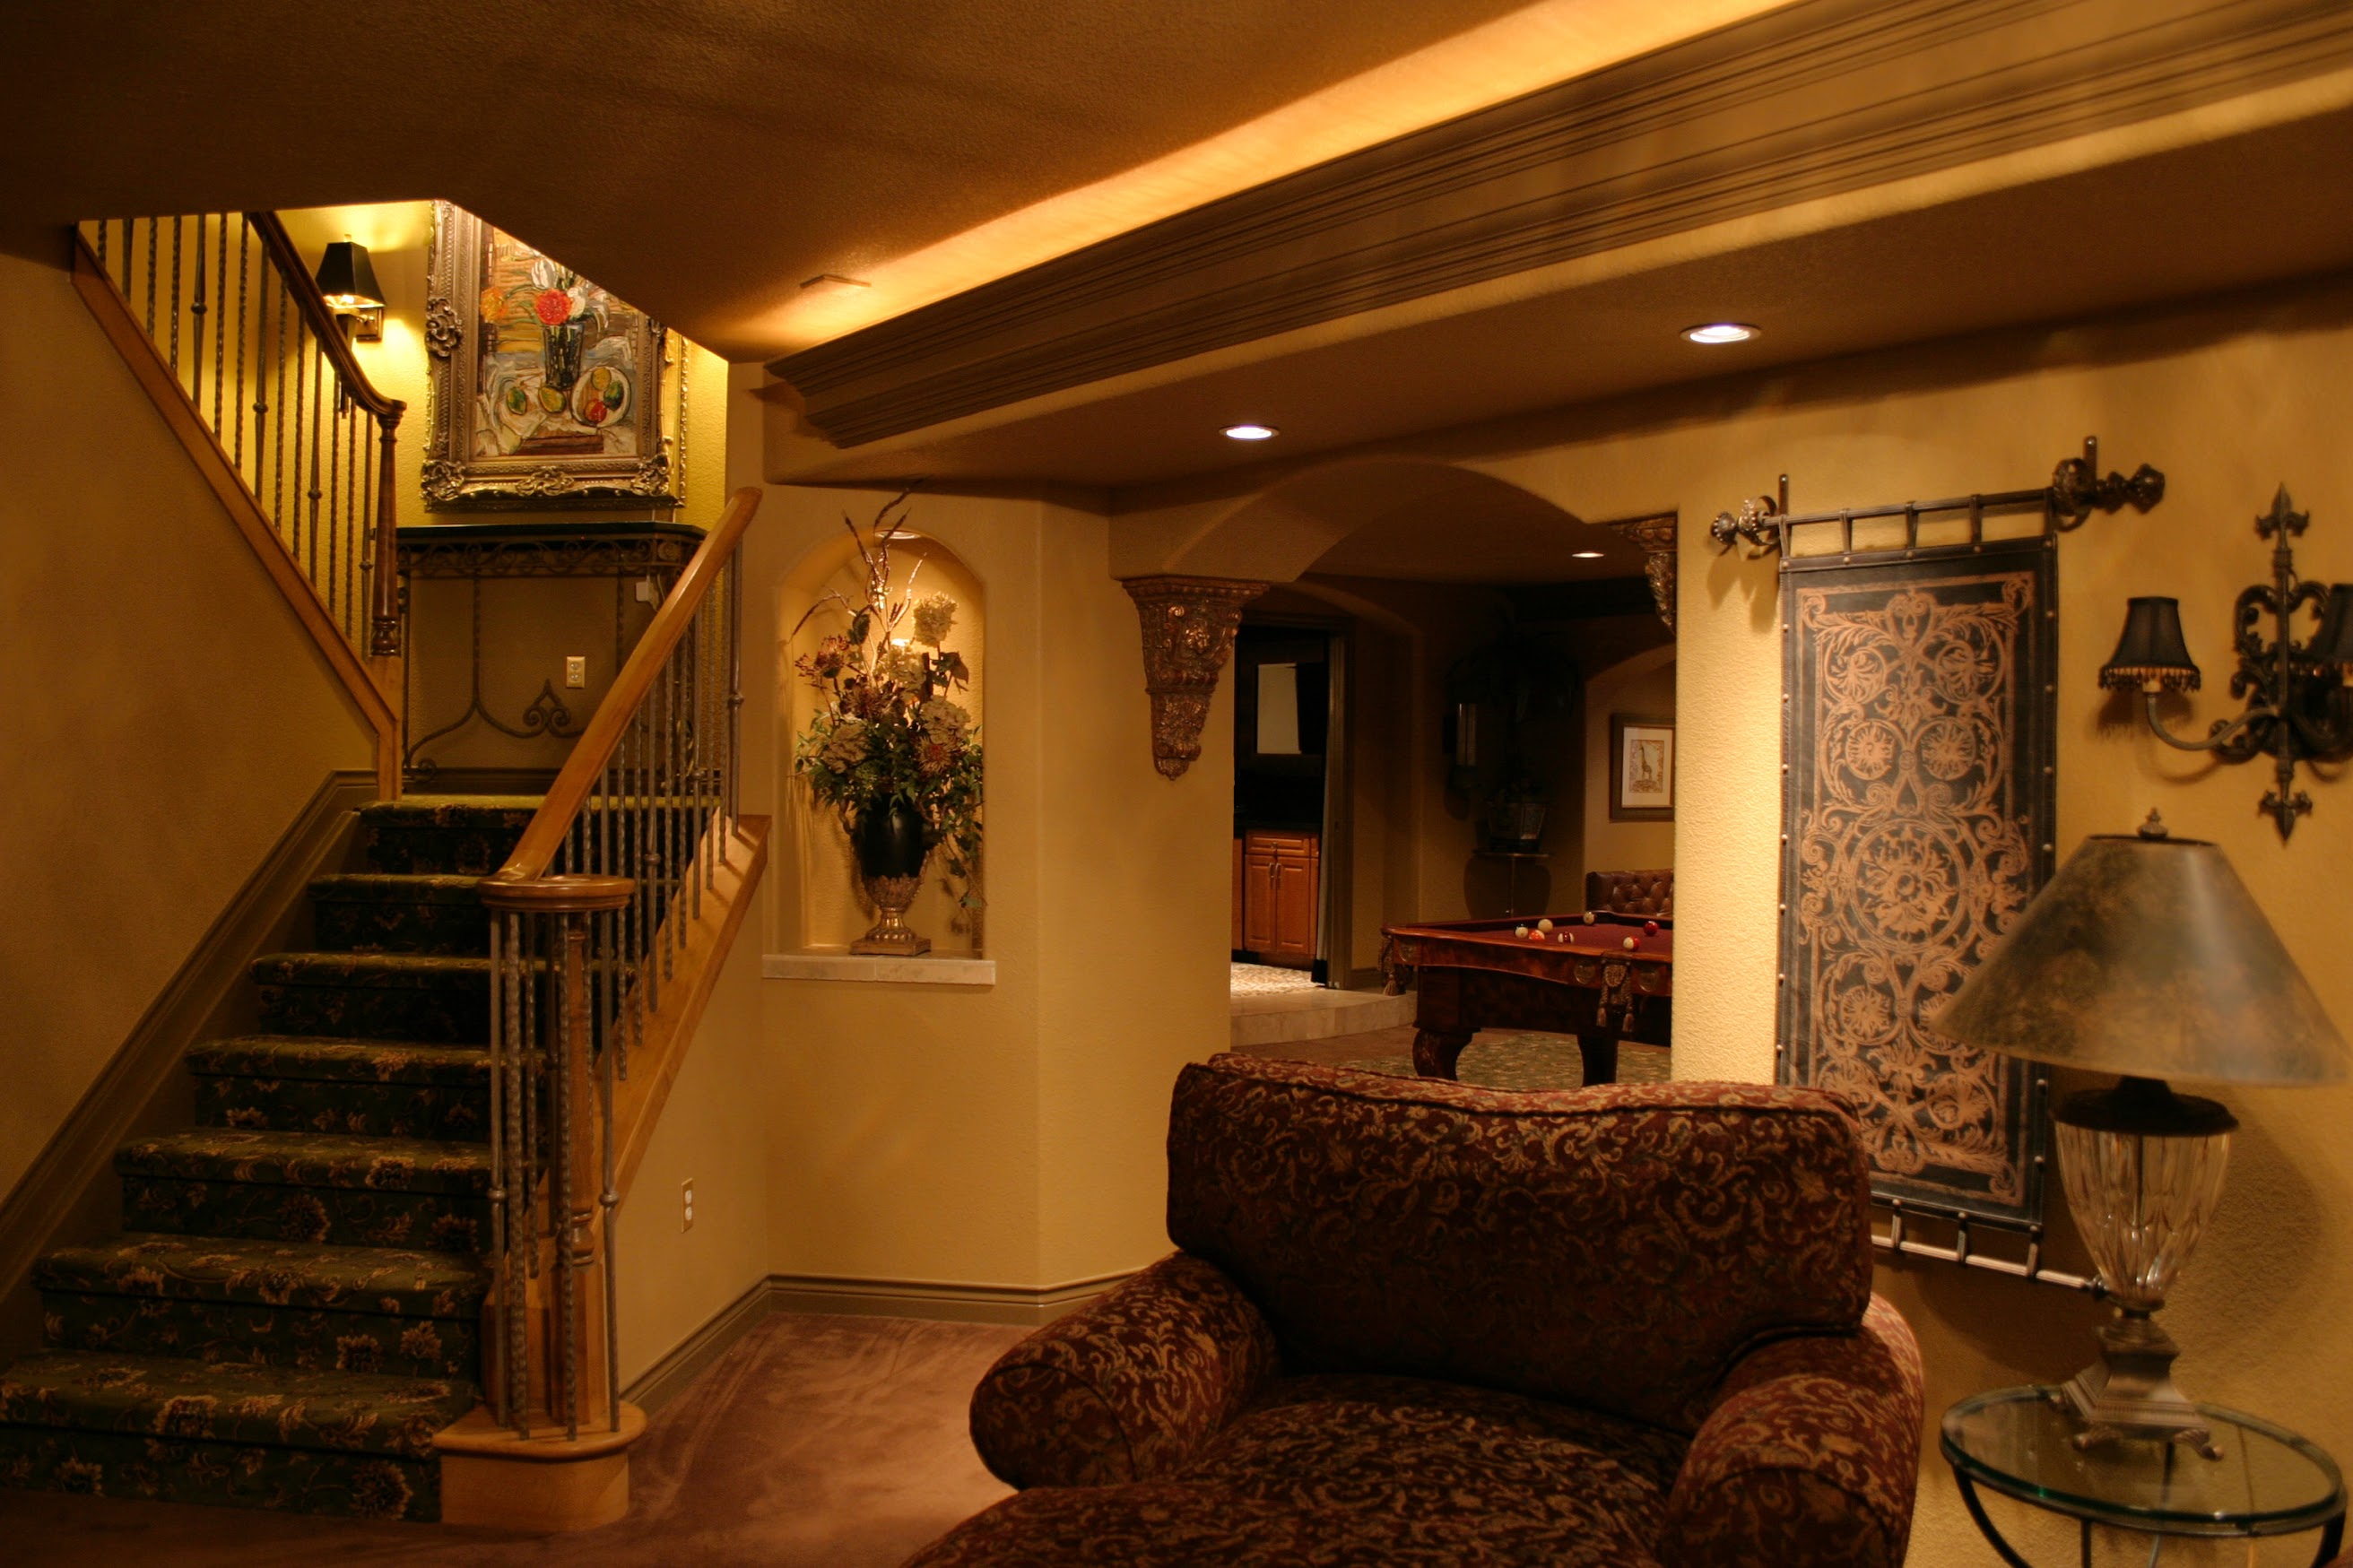 Basement Remodeling Denver with Brothers ConstructionBrothers Construction